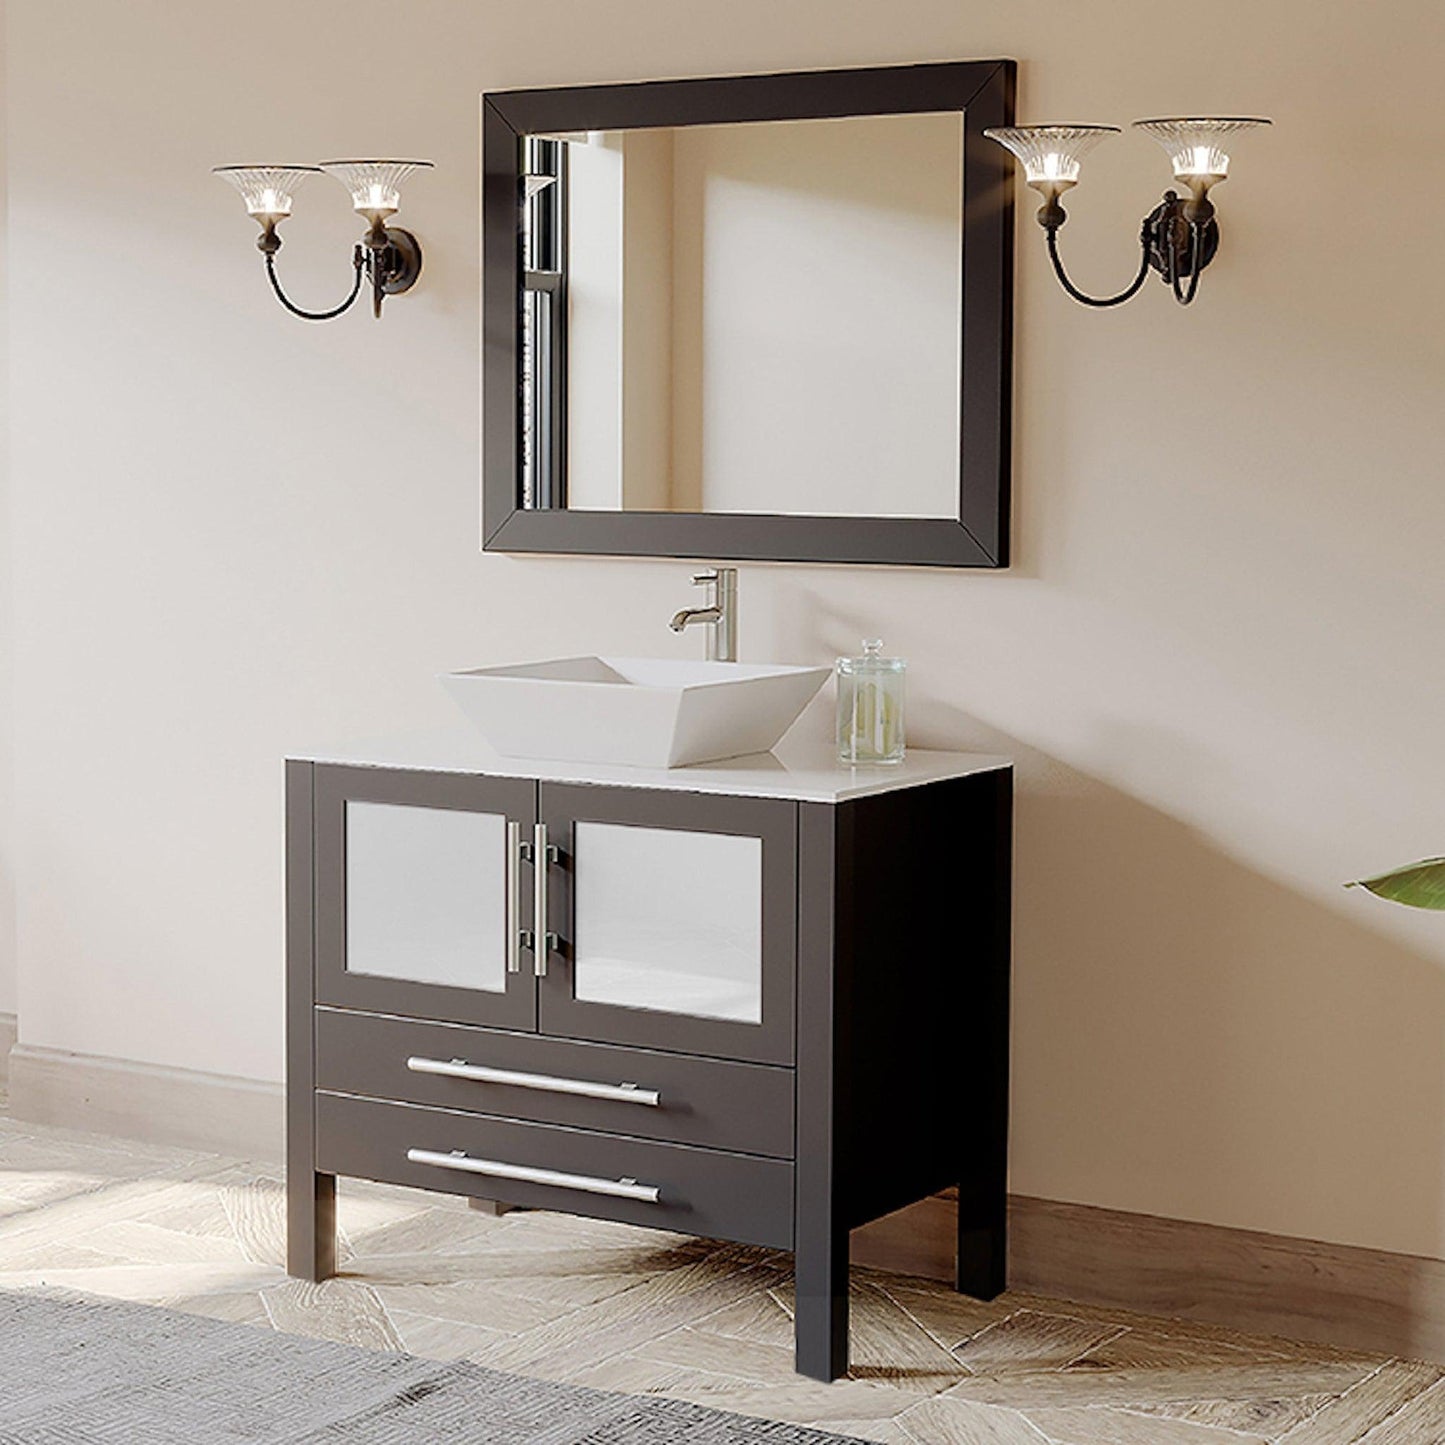 Cambridge Plumbing 36" Black Espresso Wood Single Vanity Set With Porcelain Countertop And Square Vessel Sink With Polished Chrome Plumbing Finish